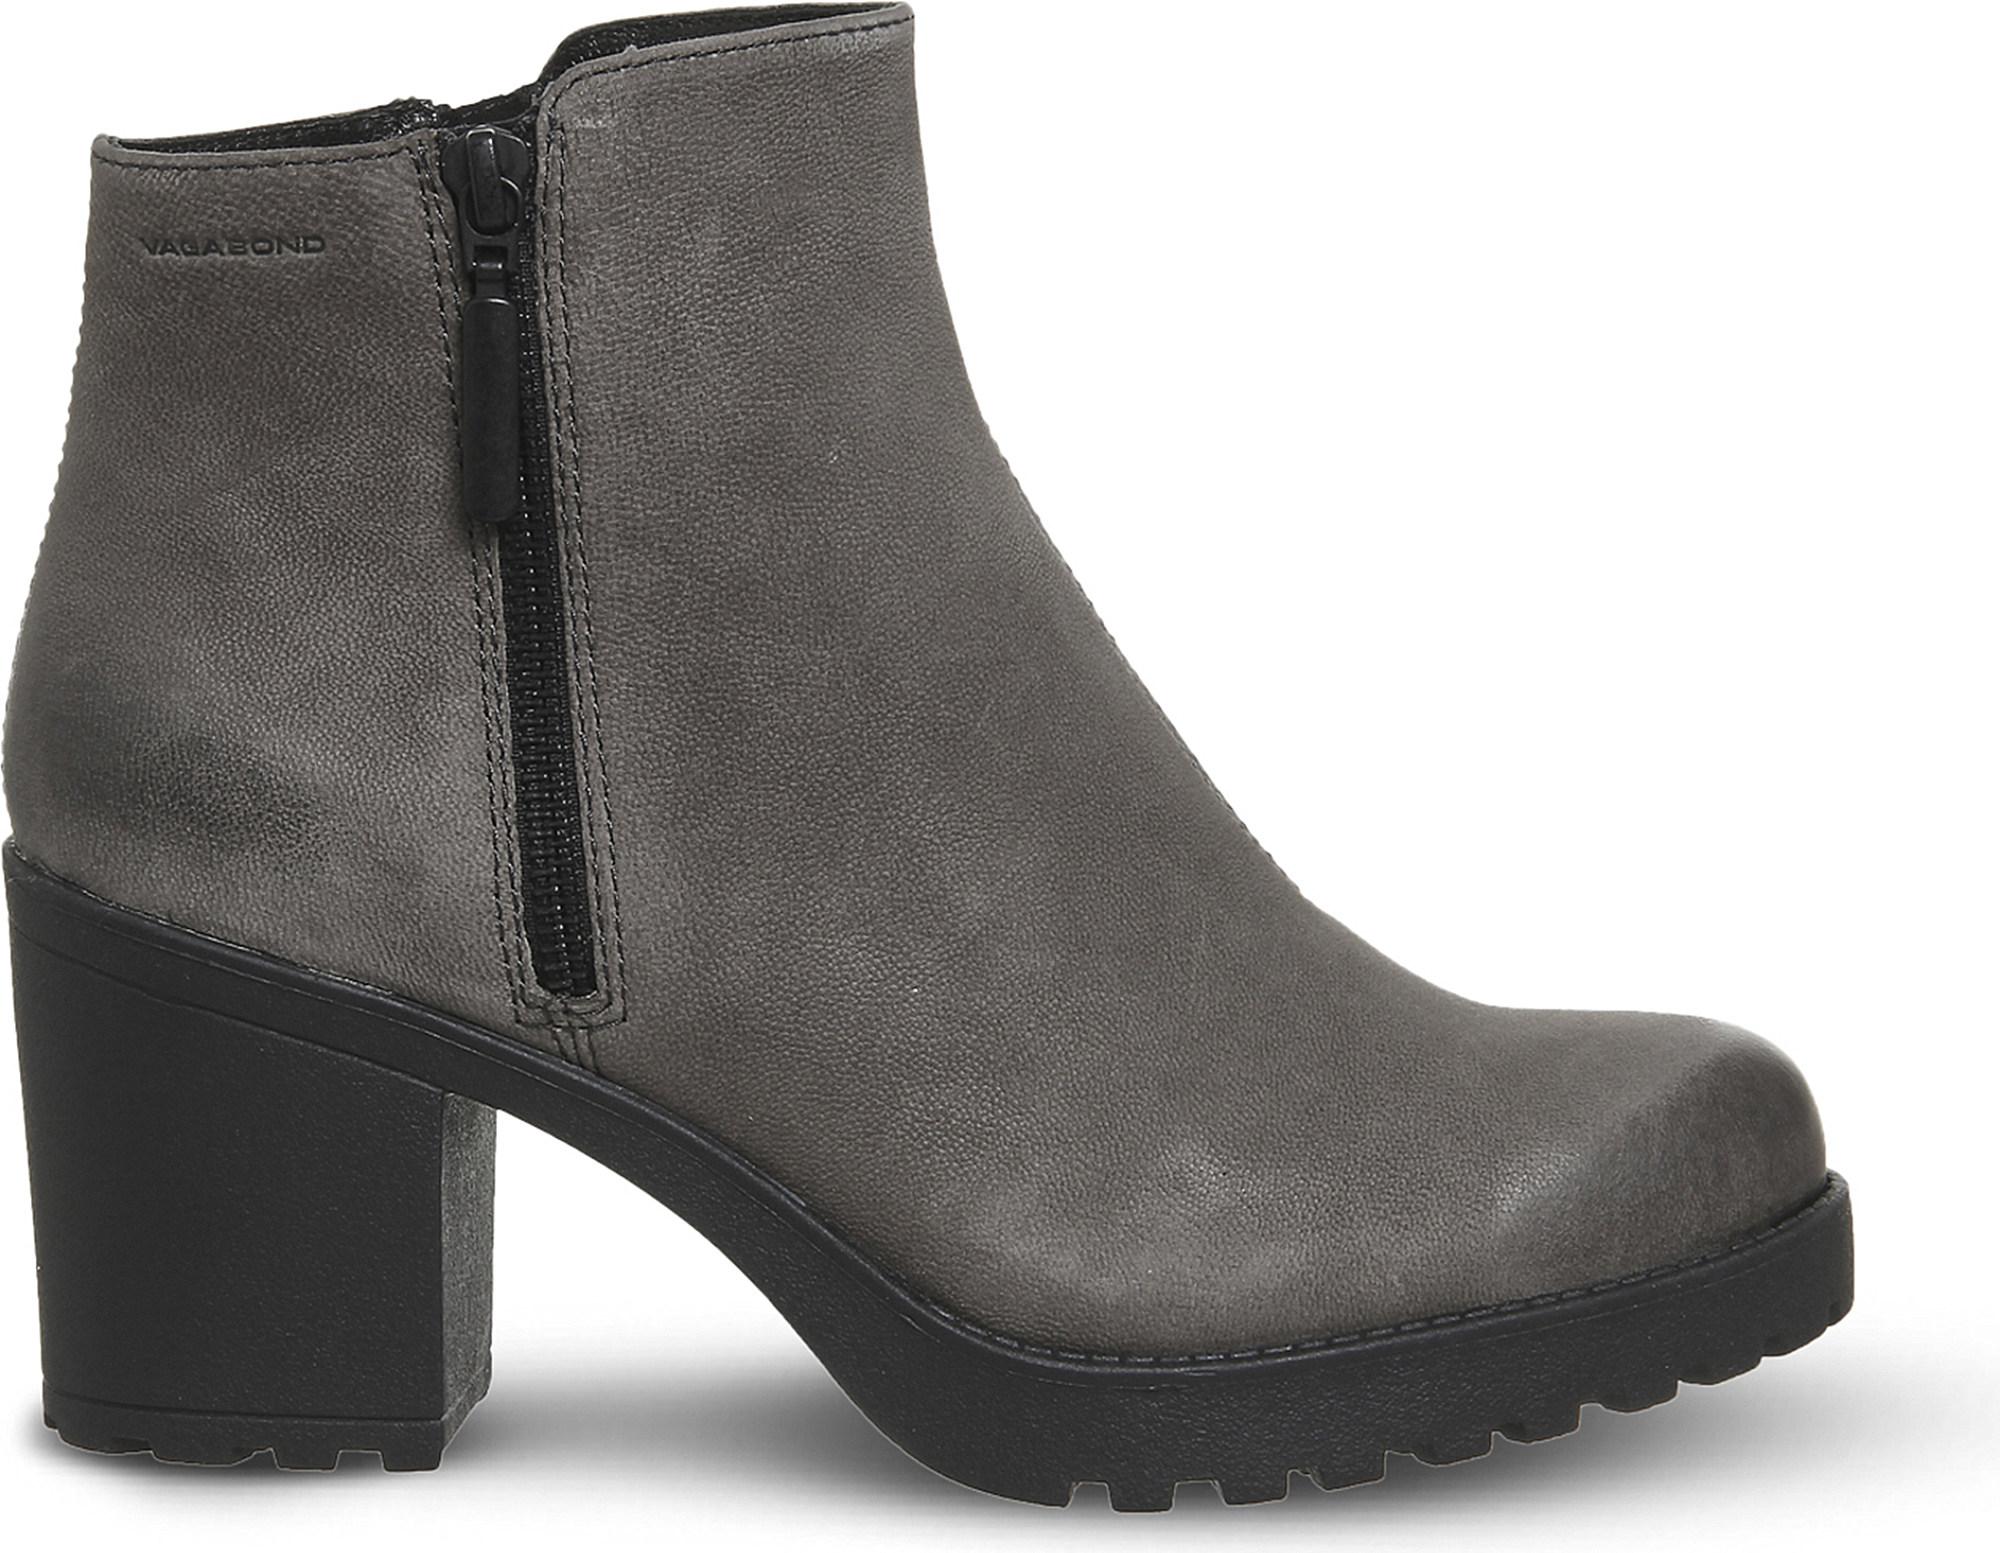 Vagabond Grace Leather Ankle Boots in Stone Grey Nubuck (Gray) - Lyst